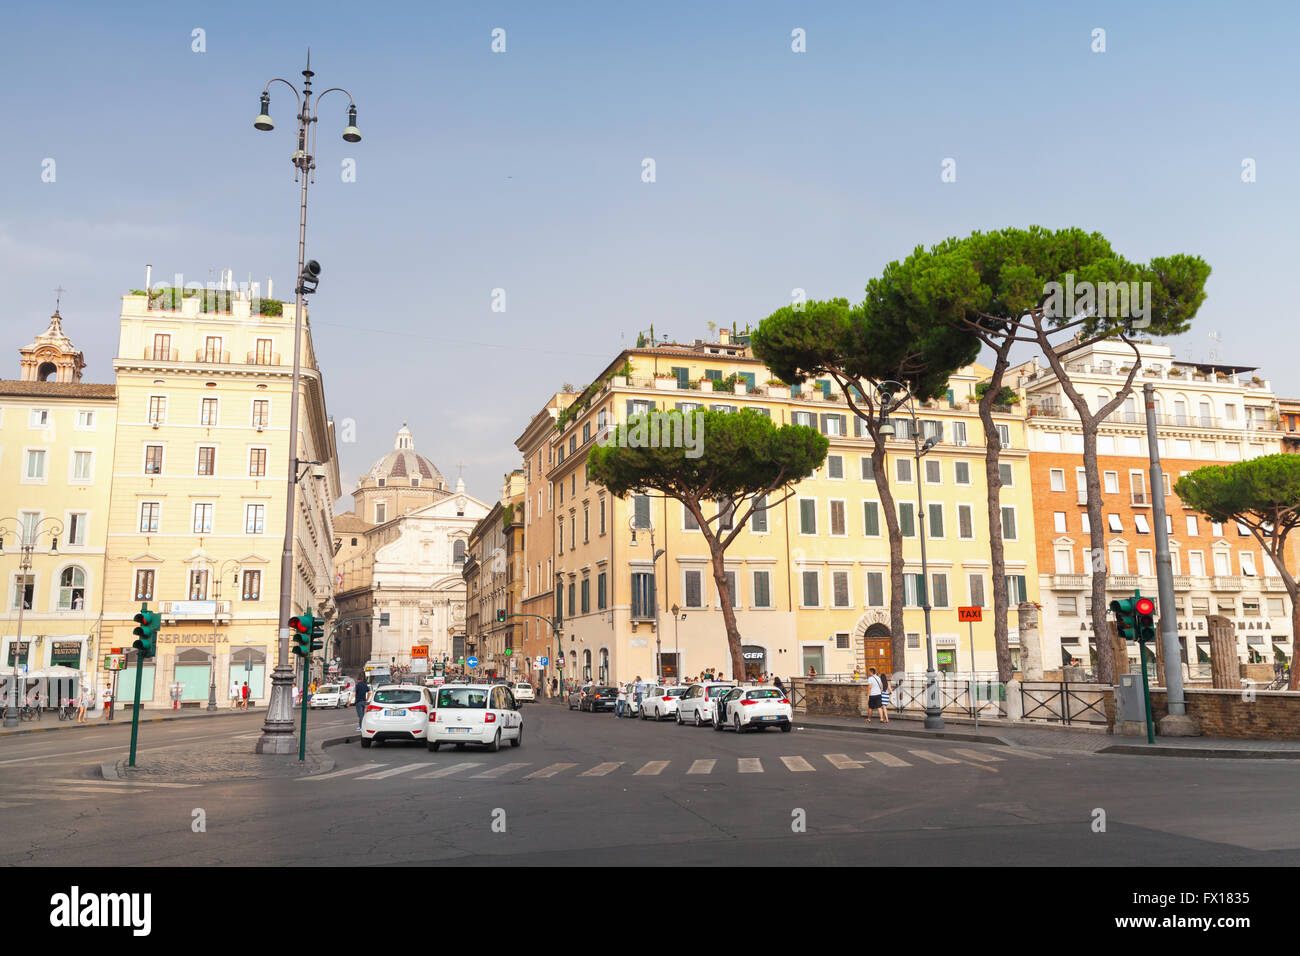 Rome, Italy - August 8, 2015: Largo di Torre Argentina, square in Rome. Street view with walking ordinary people and cars Stock Photo